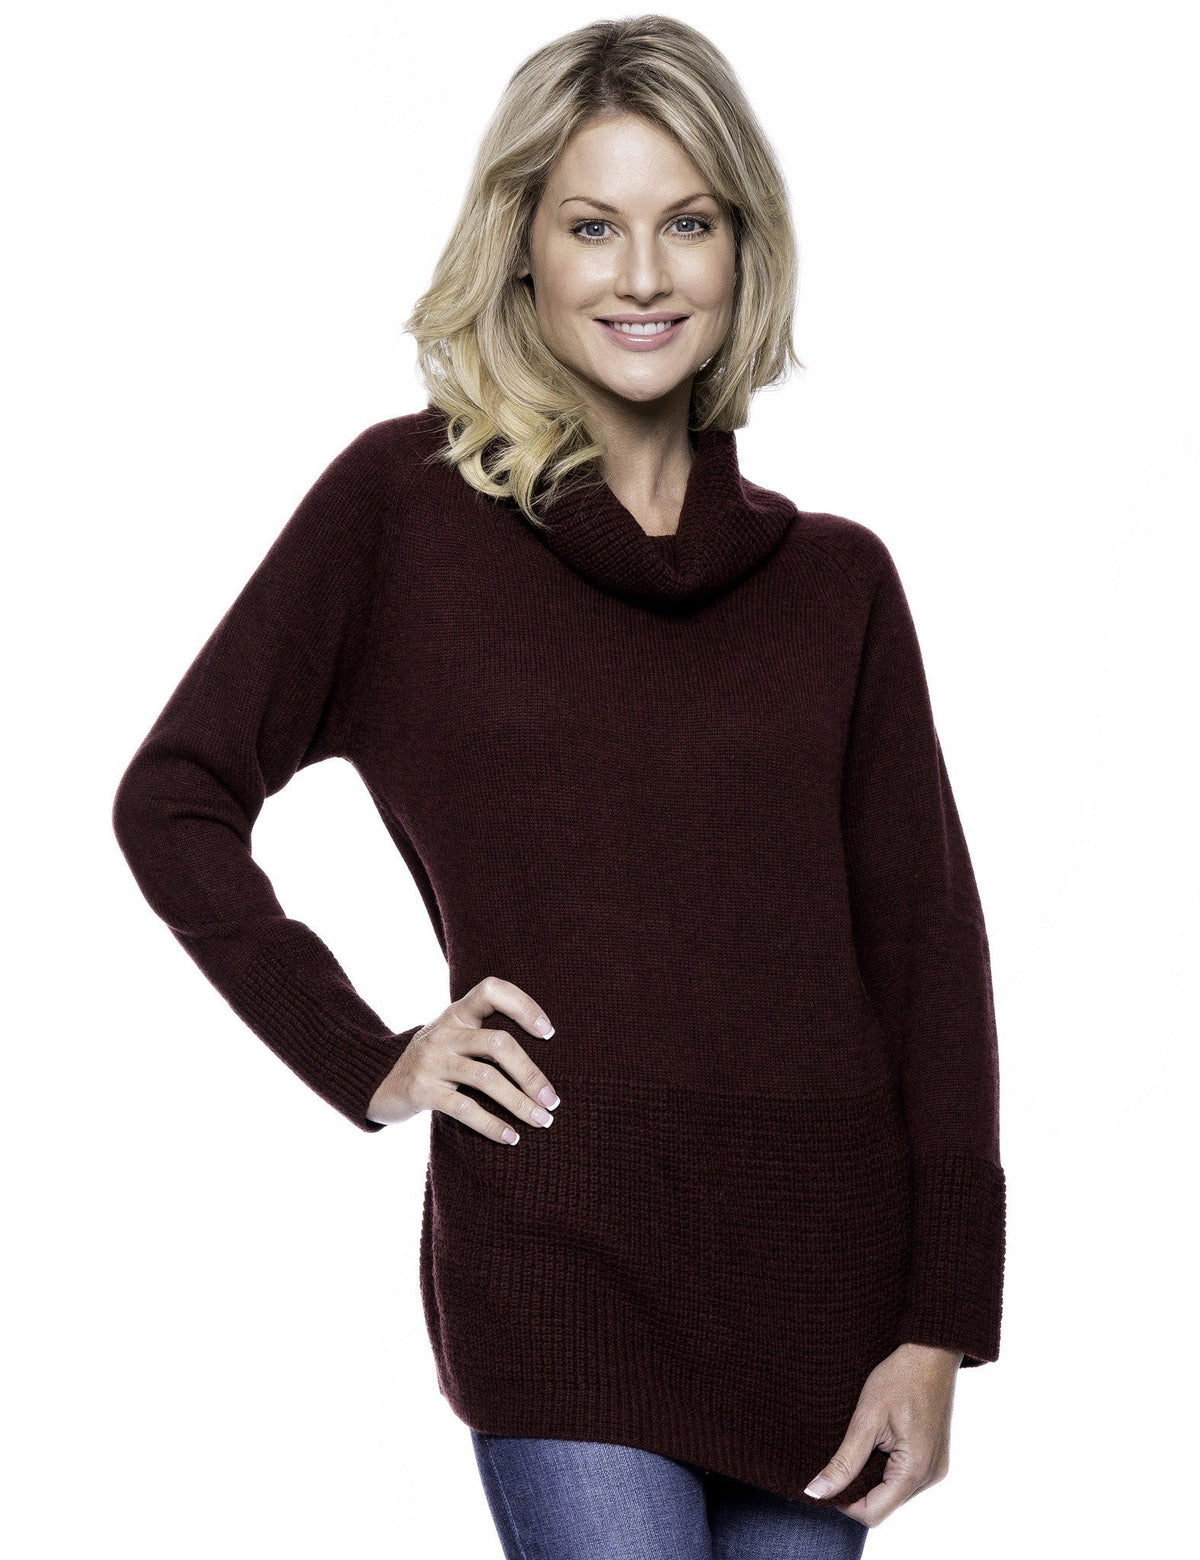 Women's Wool Blend Cowl Neck Sweater with Contrast Stitch Panel - Bordeaux